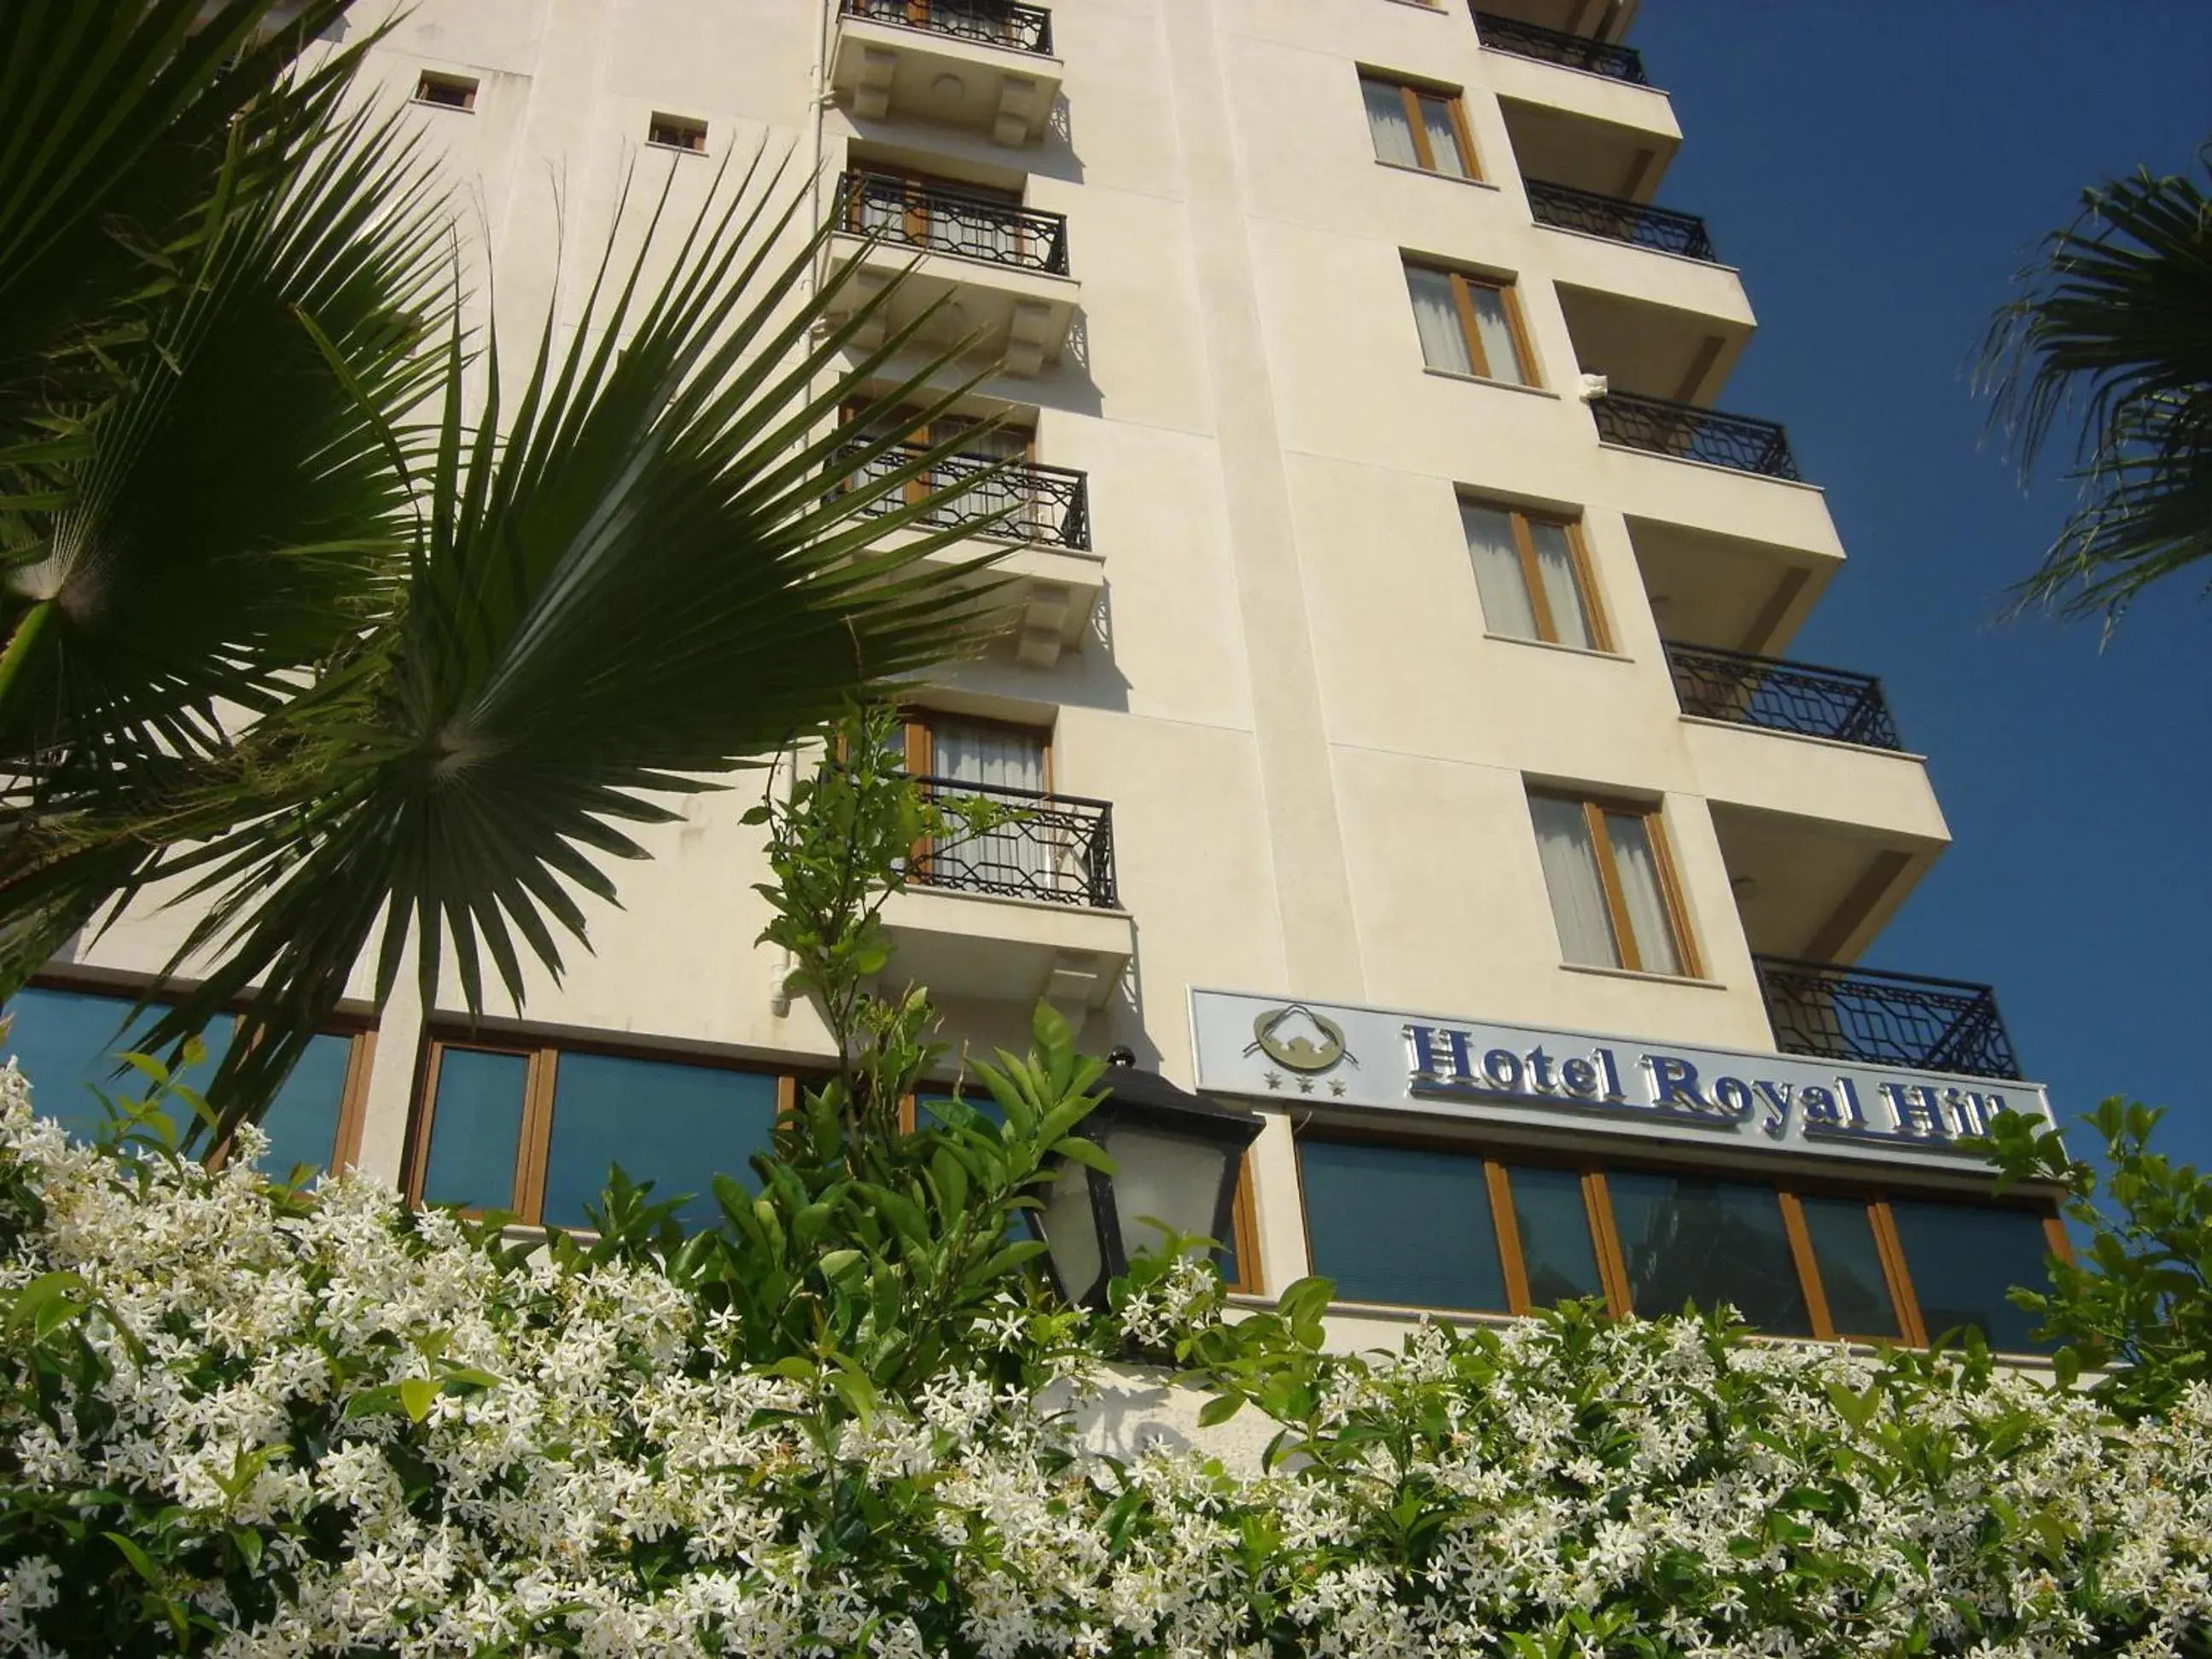 Spring, Property Building in Hotel Royal Hill